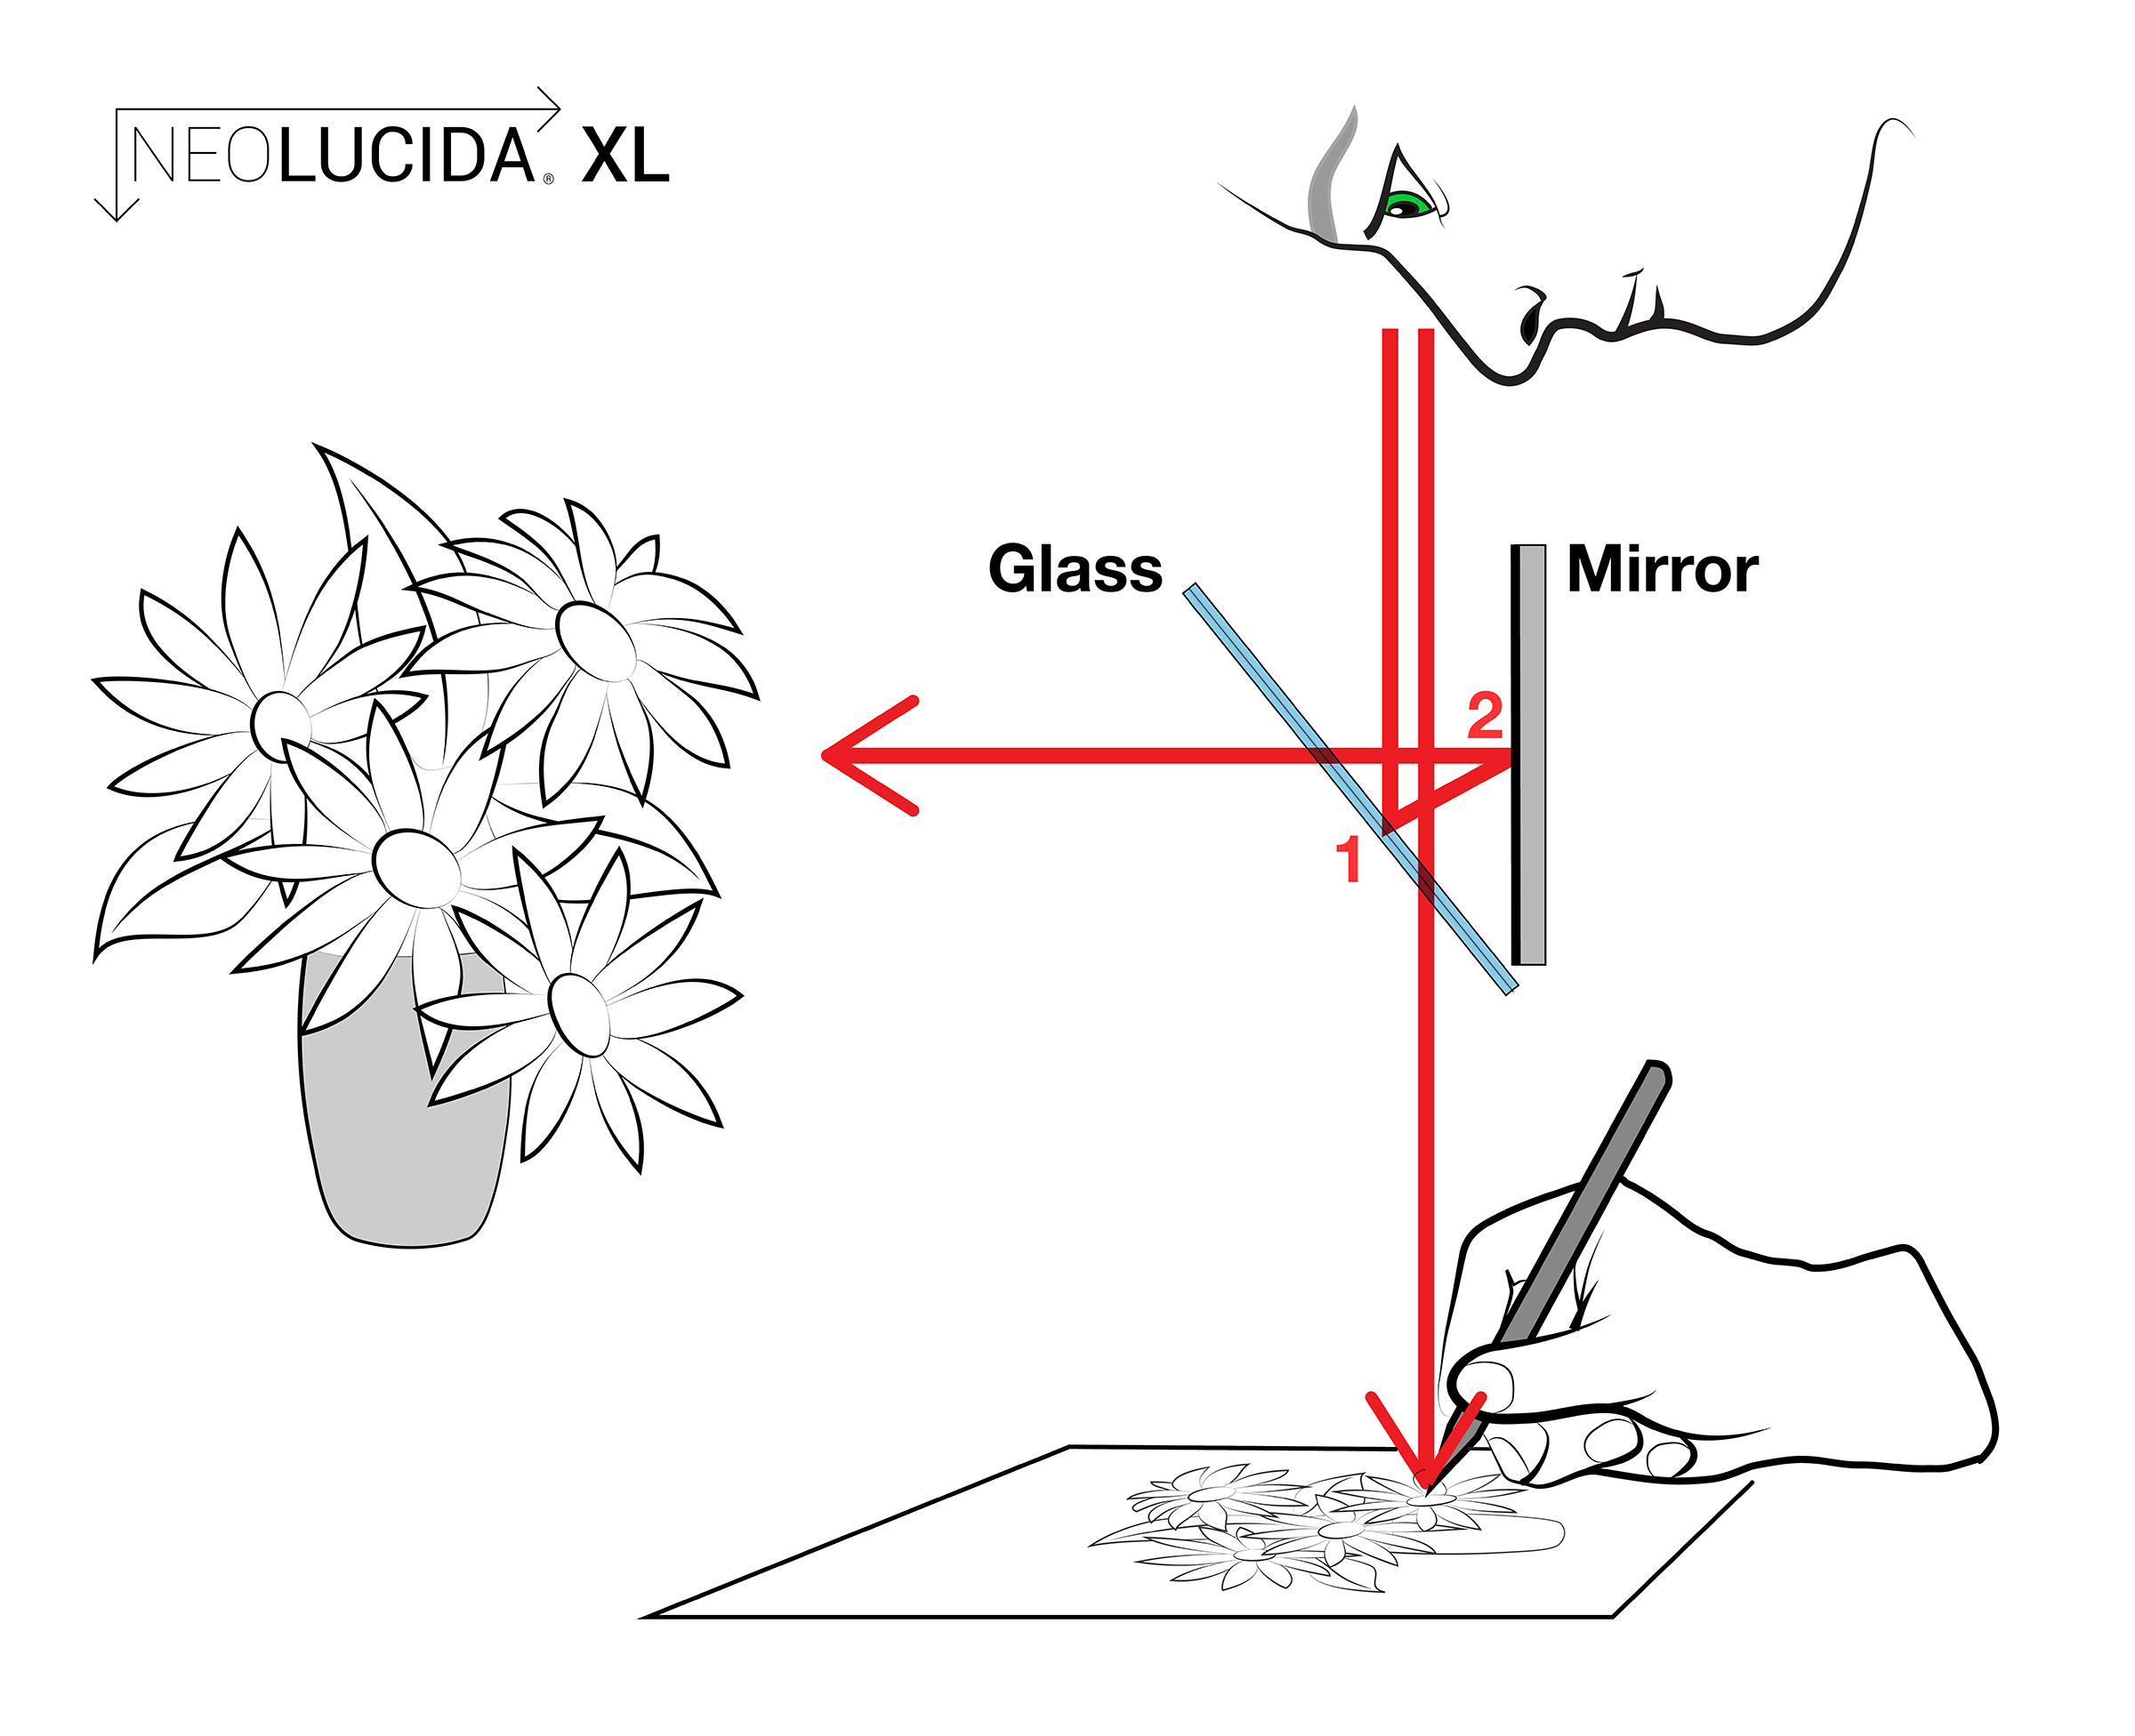 NeoLucida - A Portable Camera Lucida drawing aid (with 2 extra prisms)